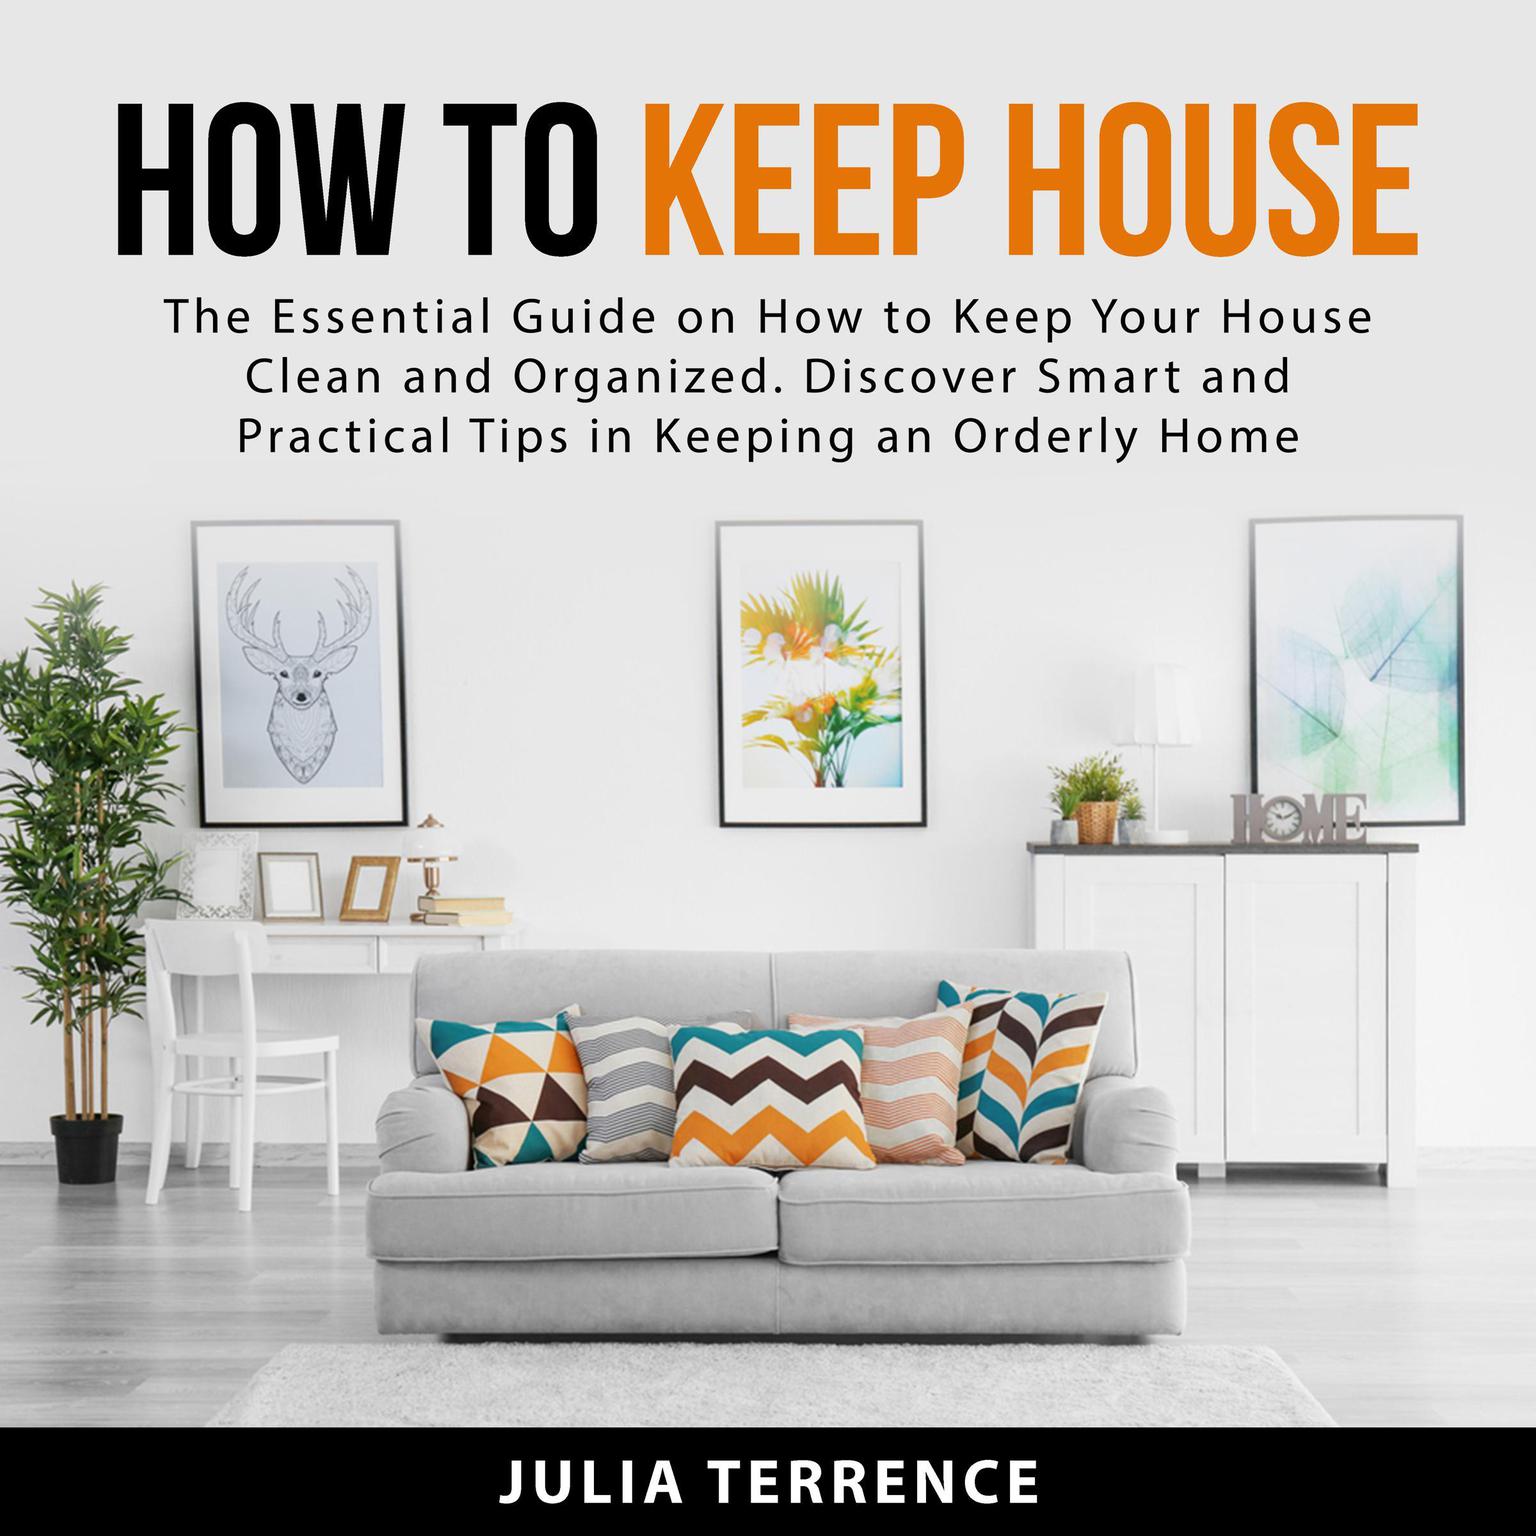 How to Keep House: The Essential Guide on How to Keep Your House Clean and Organized. Discover Smart and Practical Tips in Keeping an Orderly Home Audiobook, by Julia Terrence